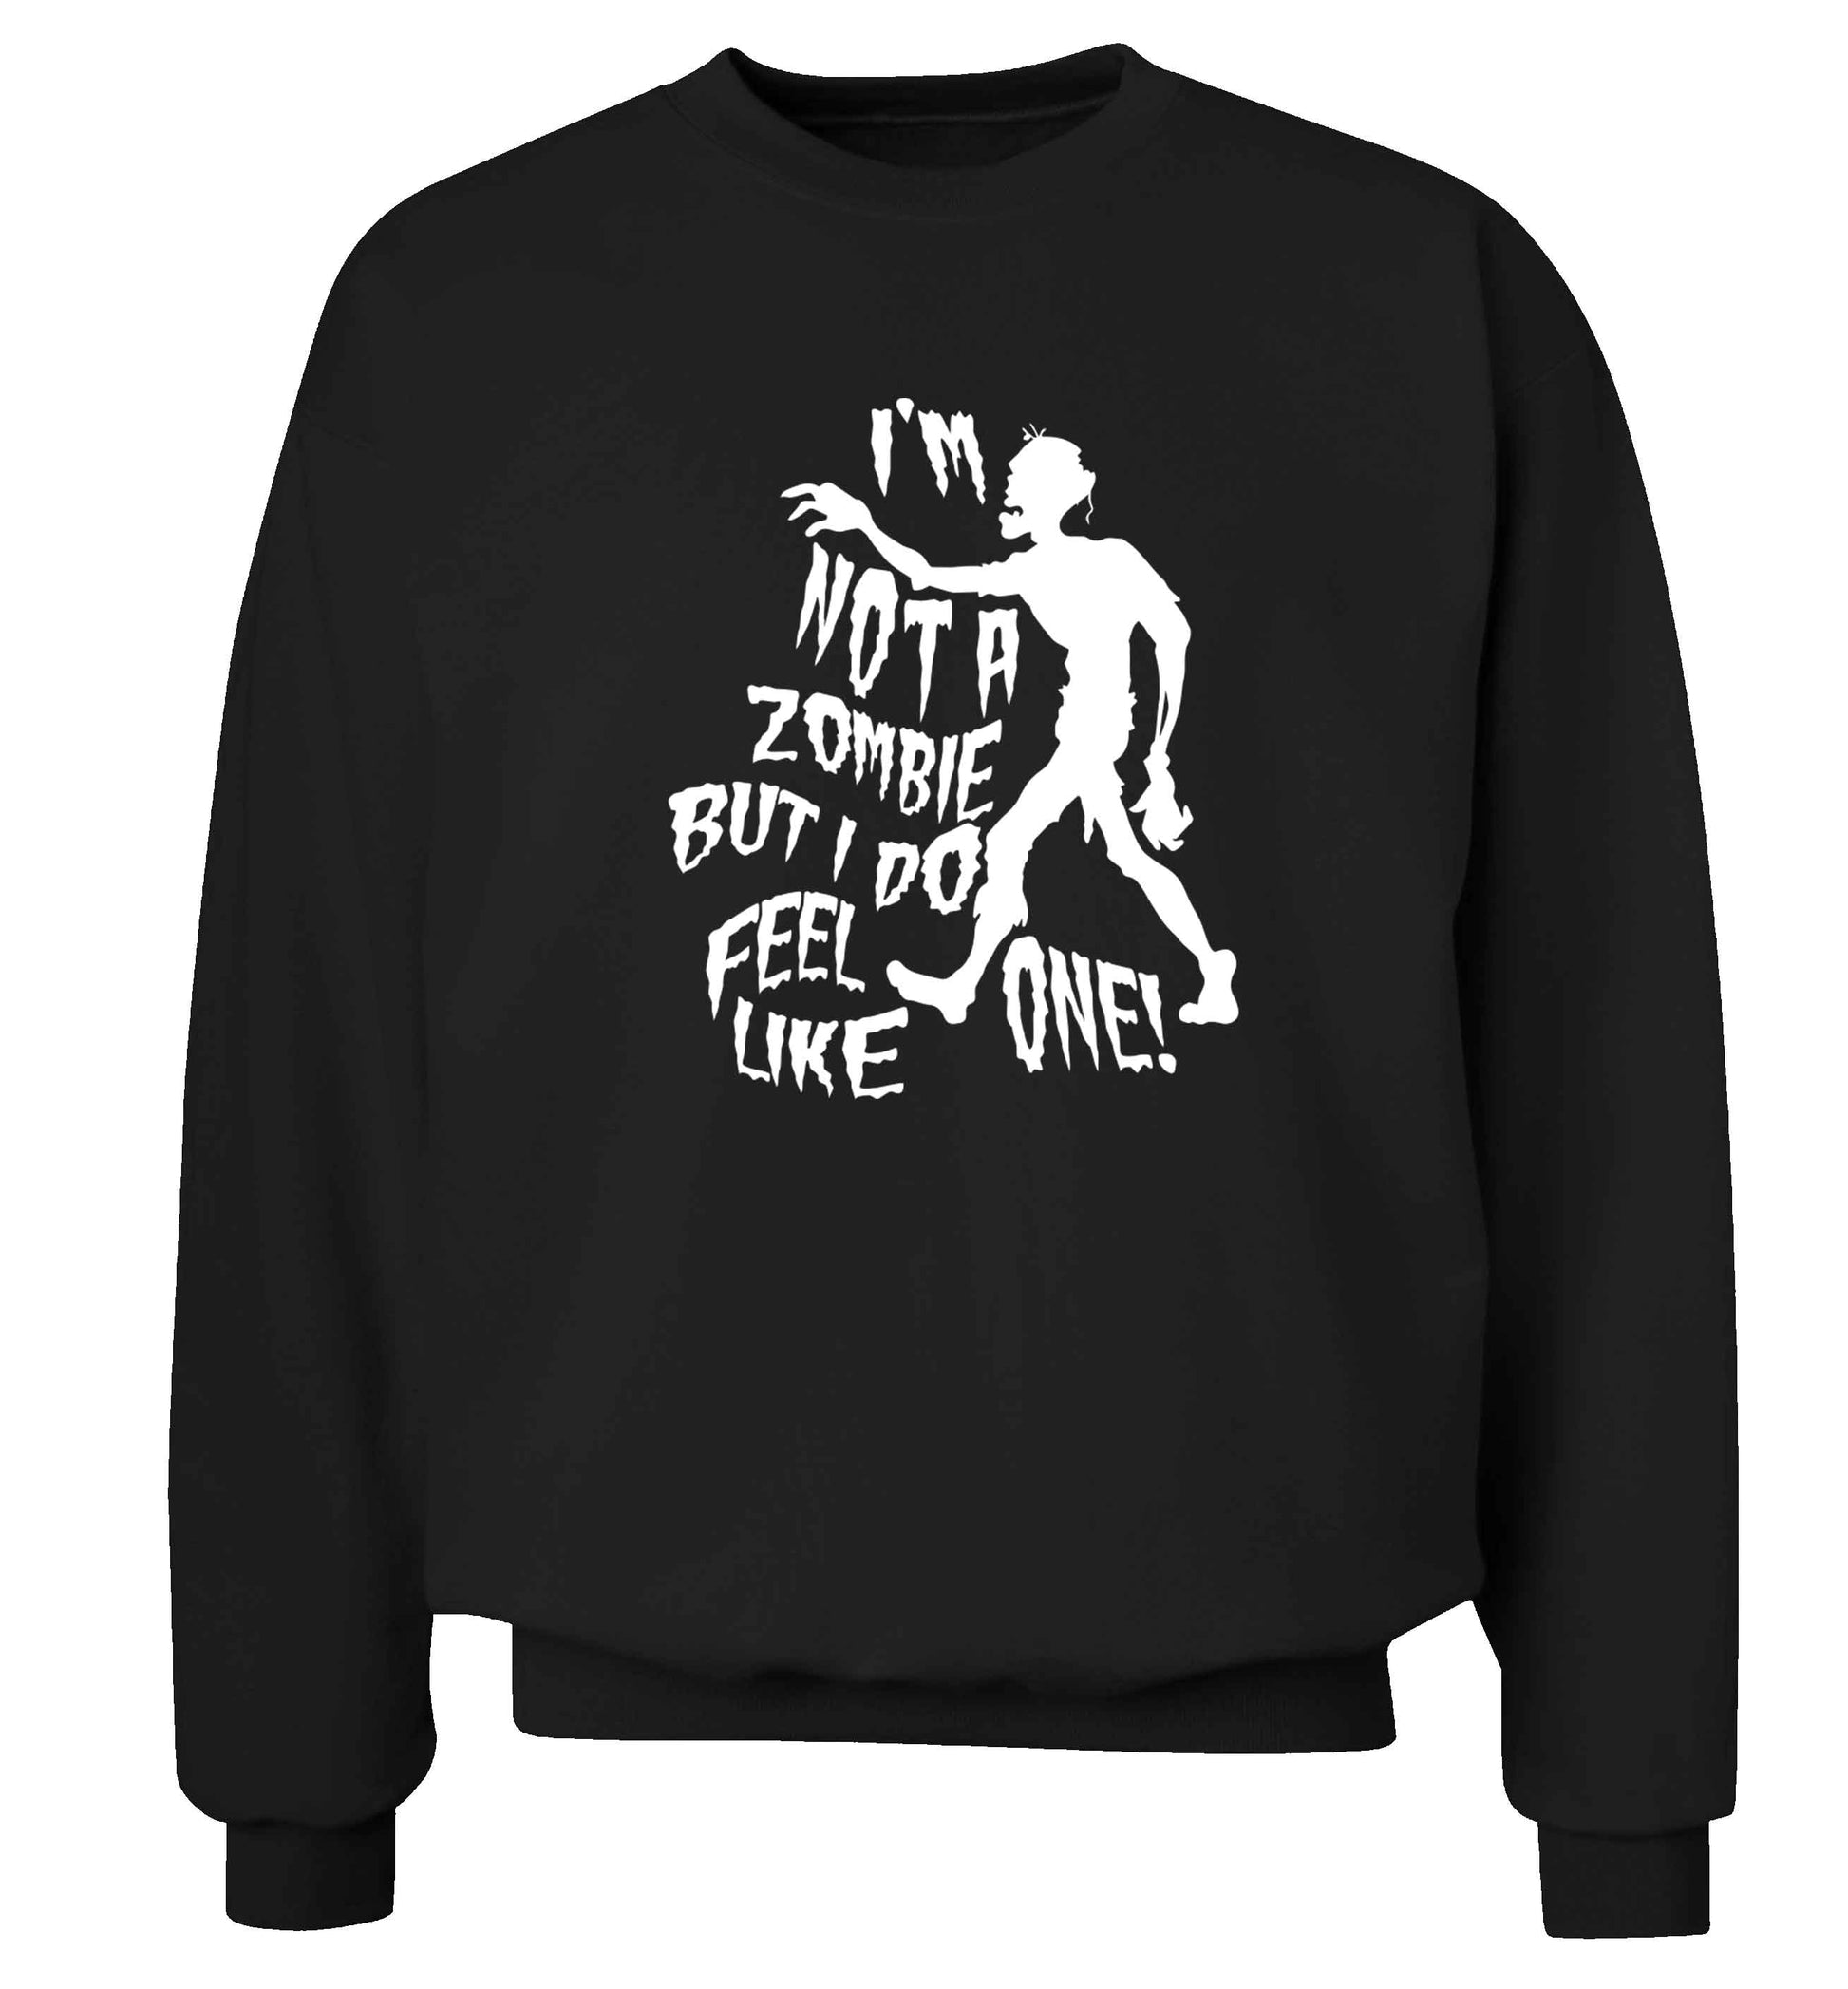 I'm not a zombie but I do feel like one! Adult's unisex black Sweater 2XL